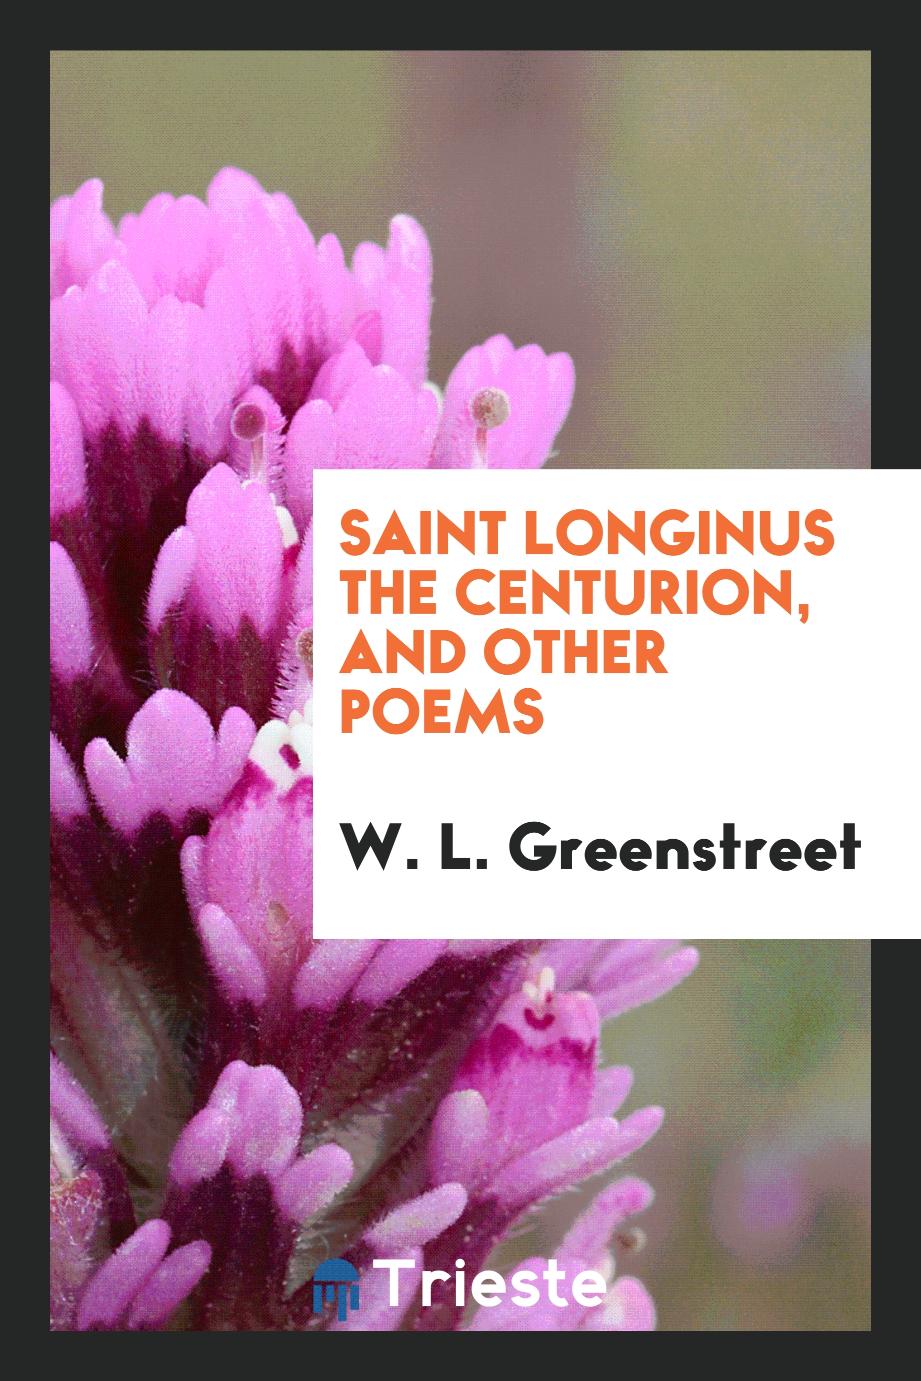 Saint Longinus the Centurion, and other poems